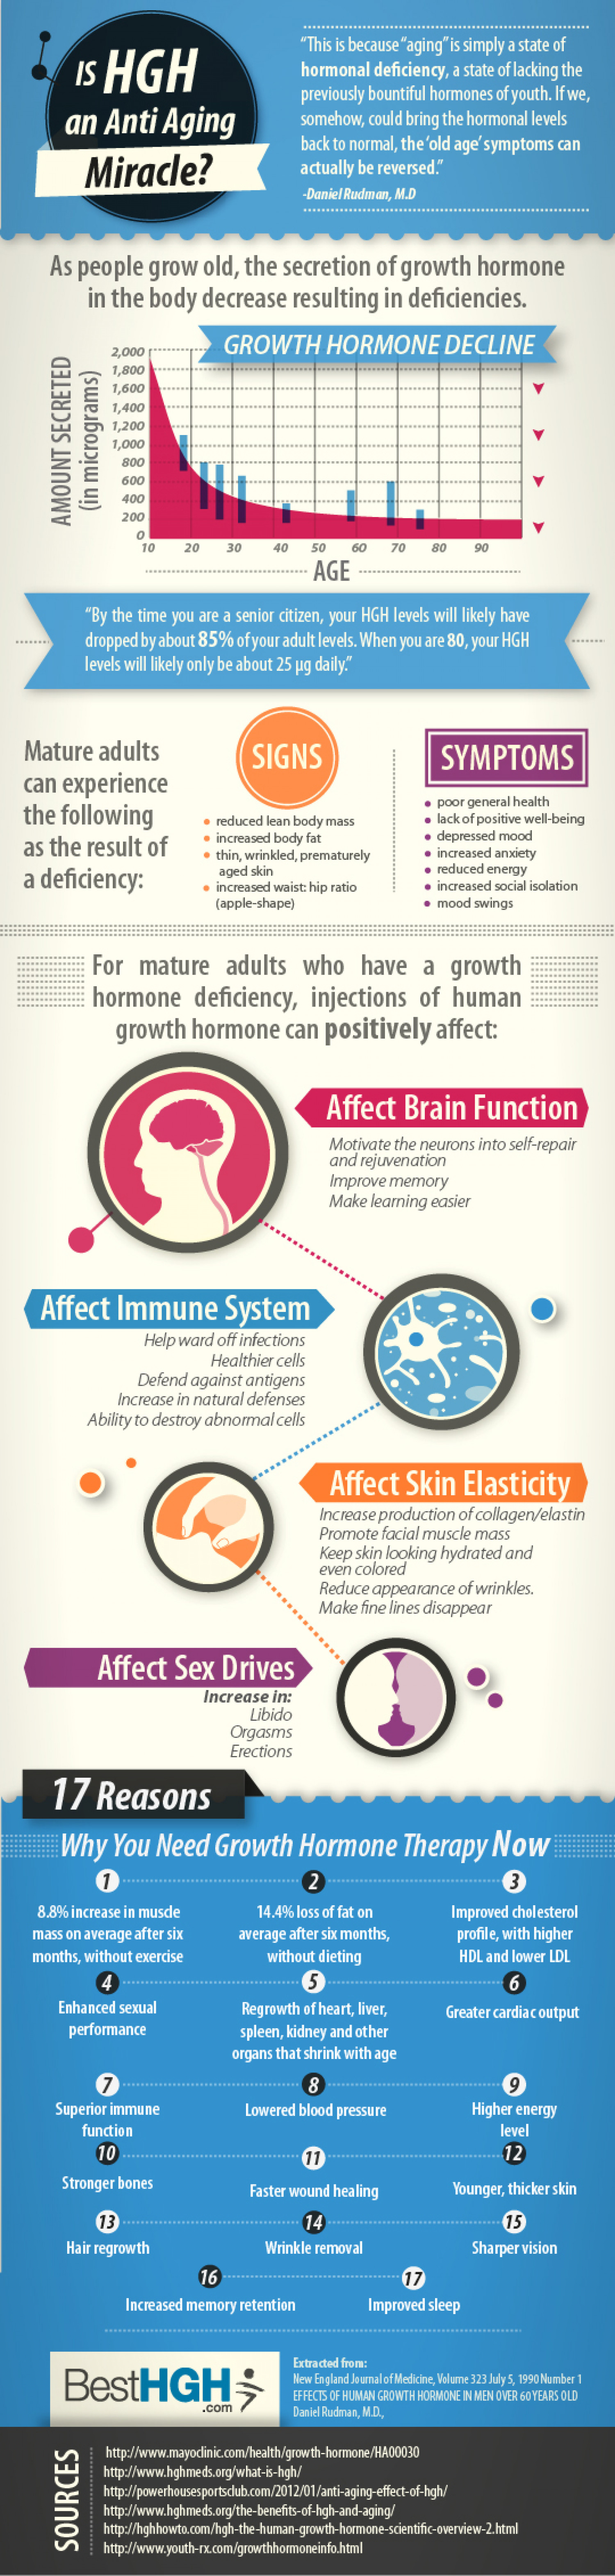 Is HGH an Anti Aging Miracle? Infographic